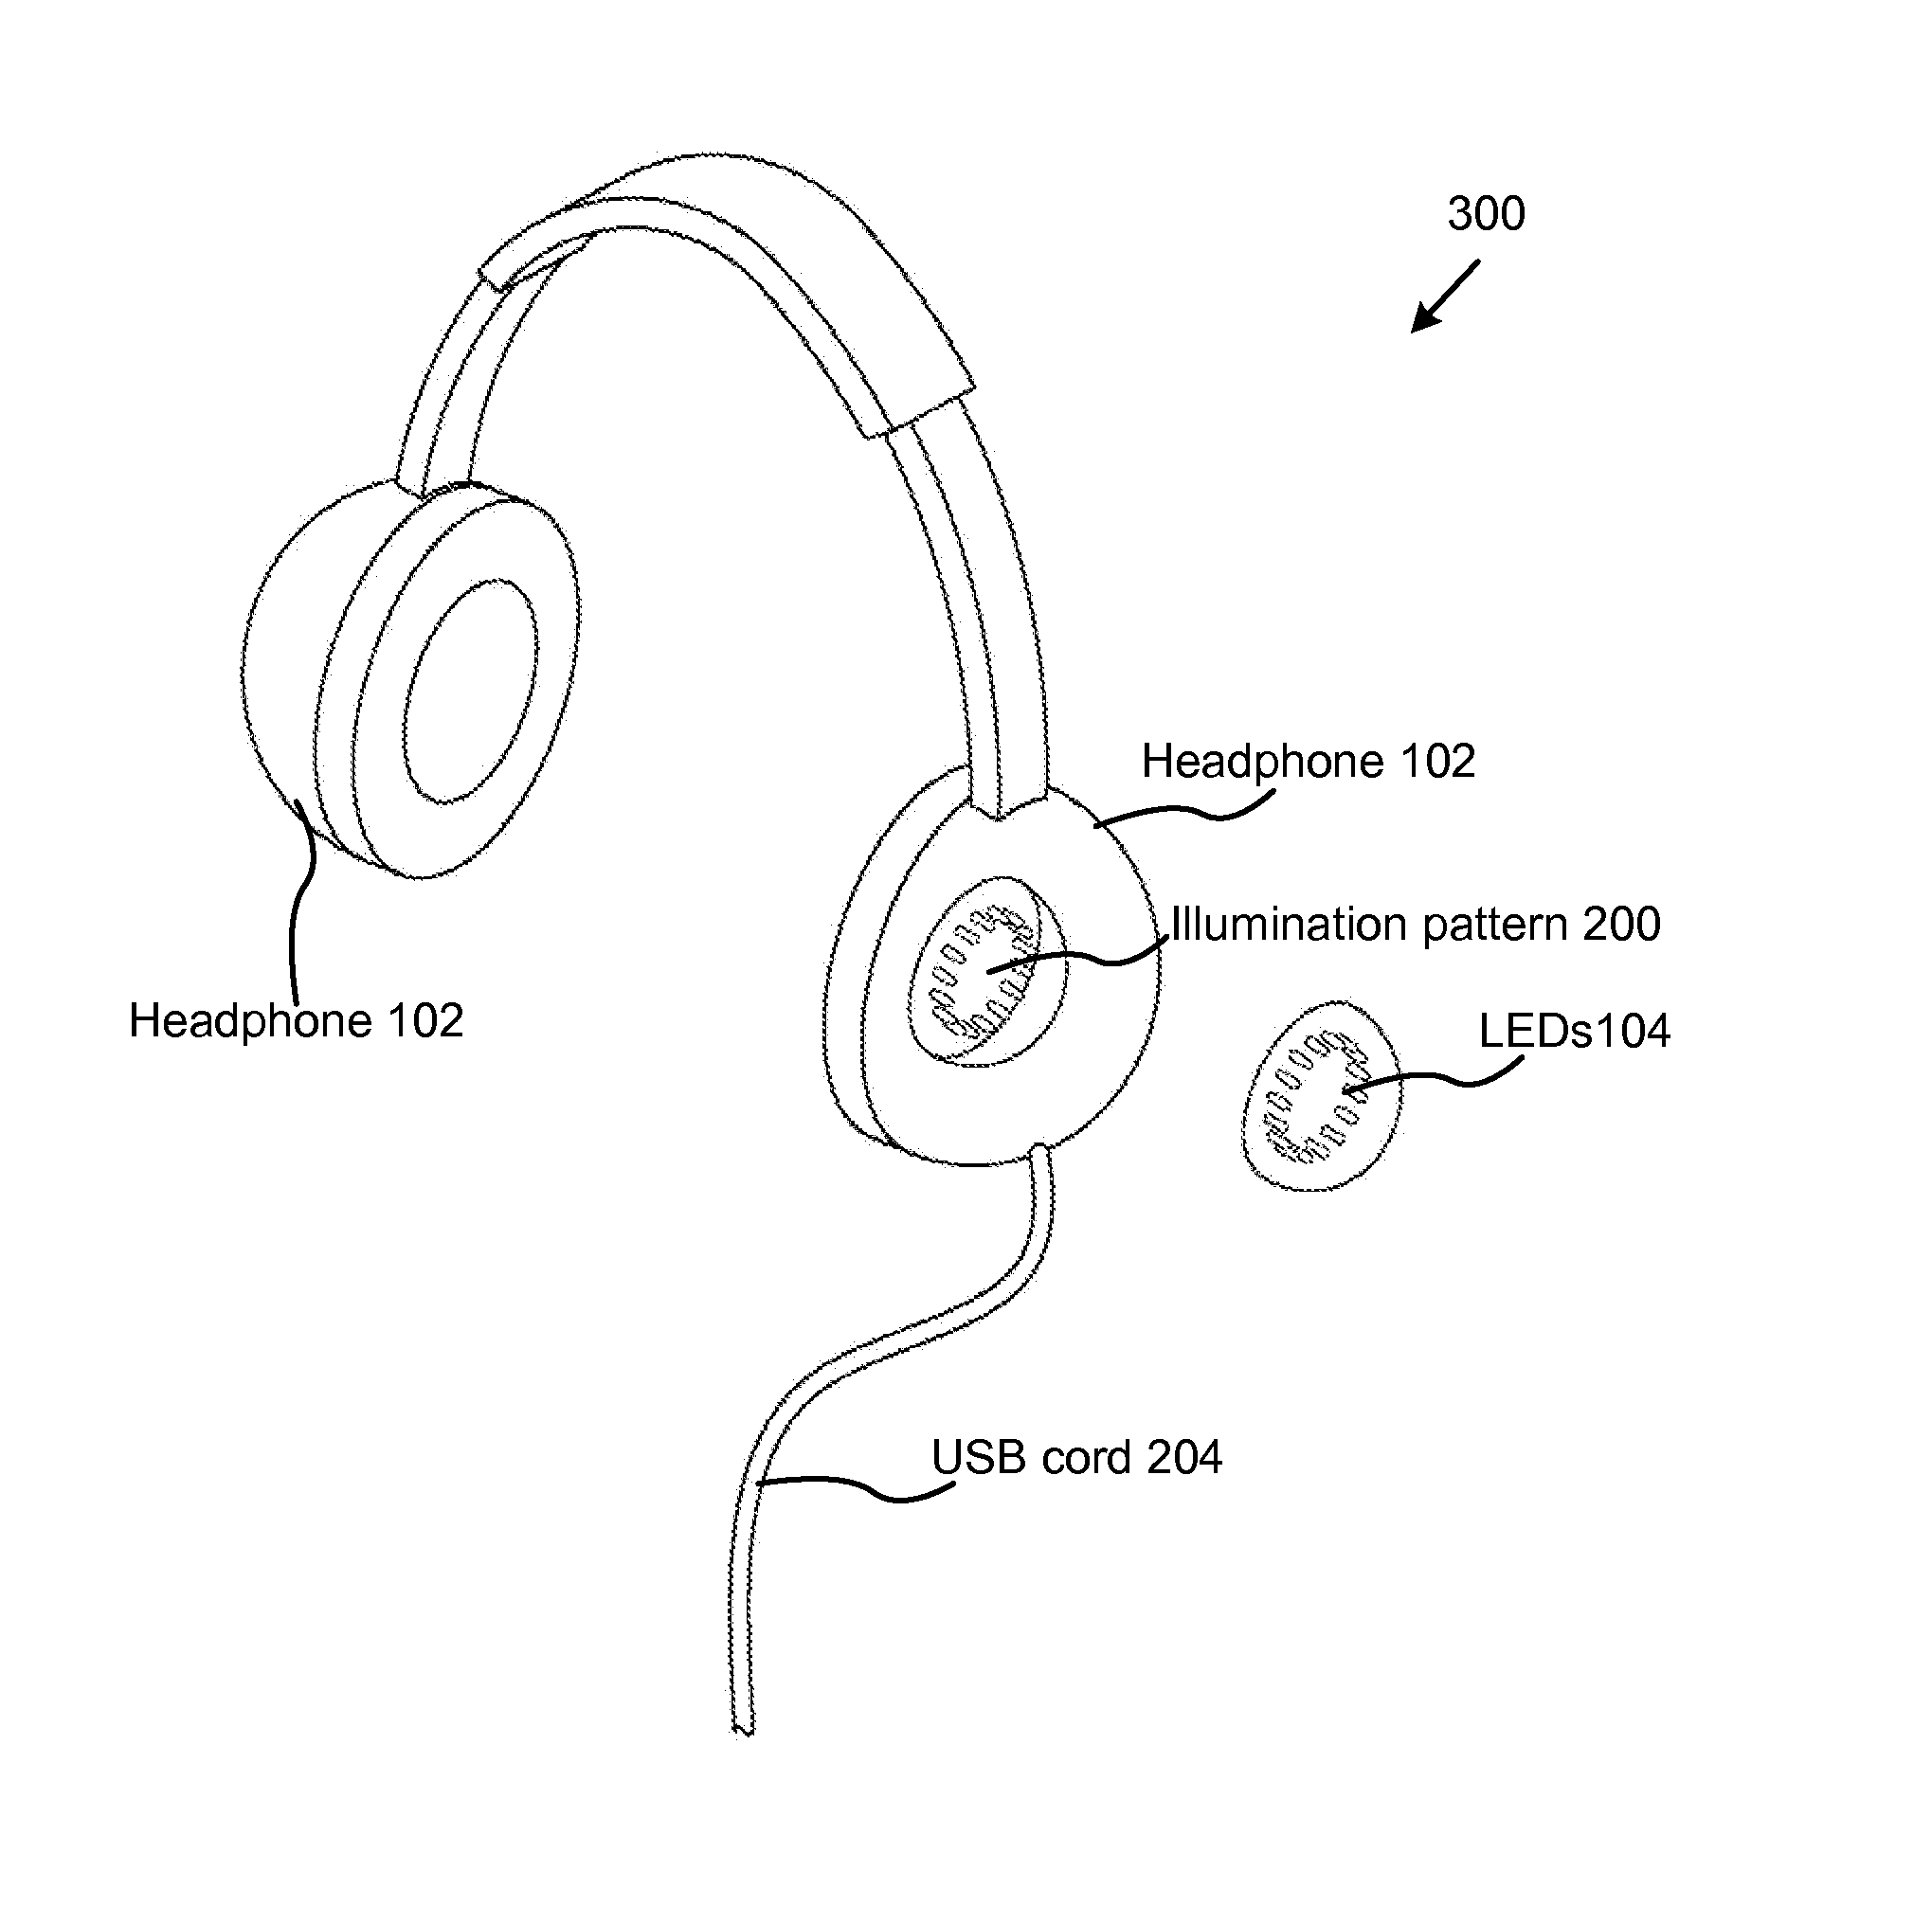 System and method for illuminating a headphone to indicate volume and/or beat